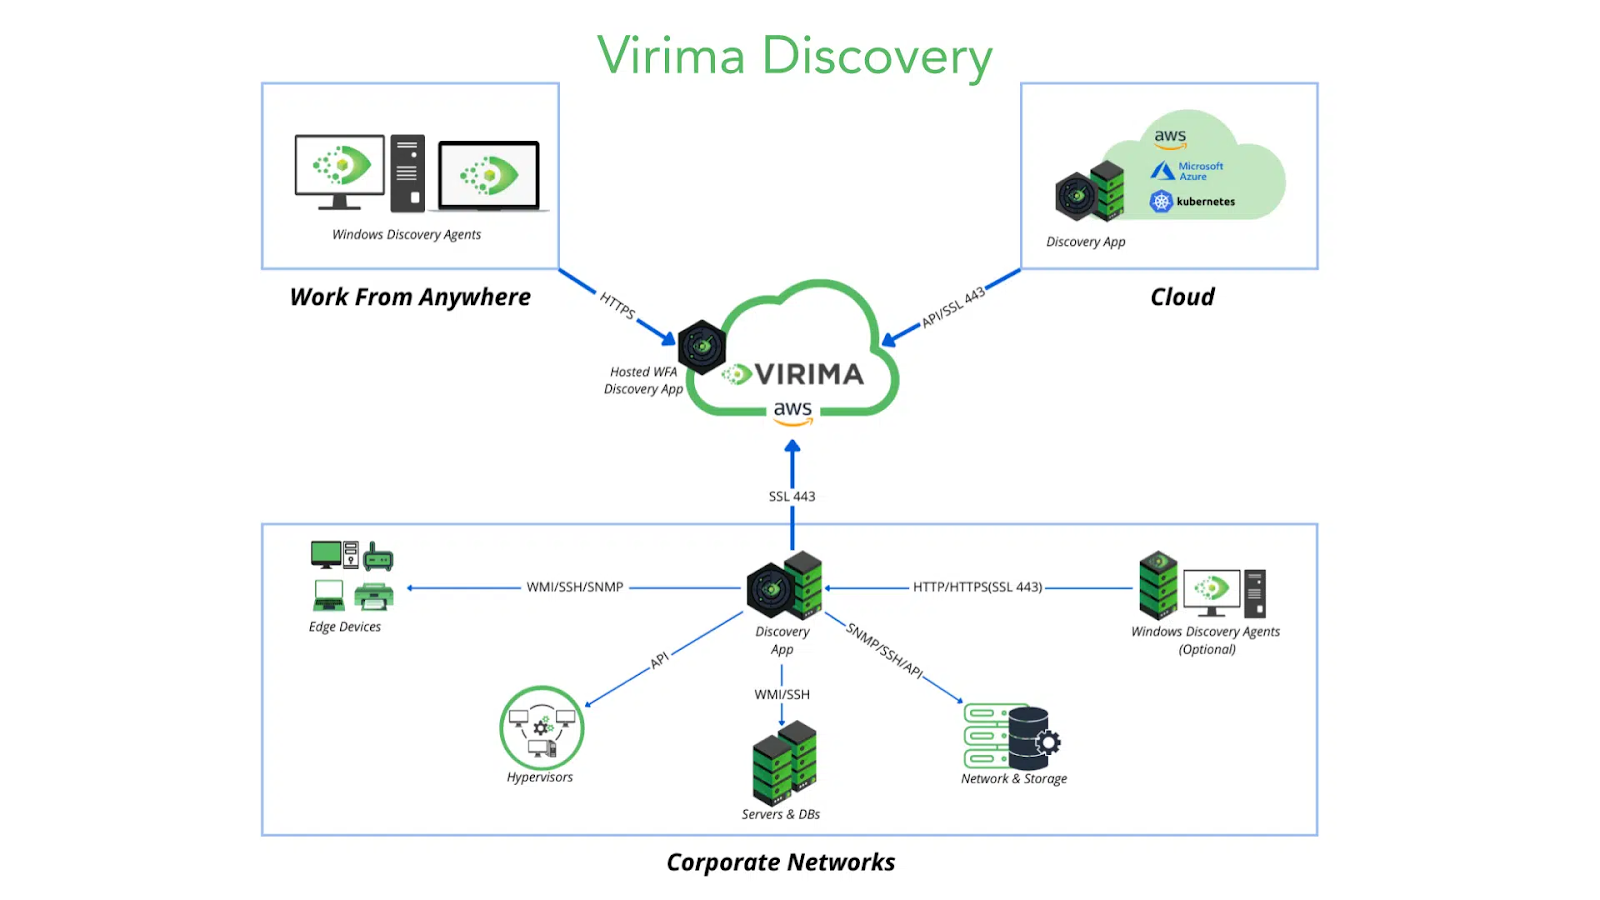 A graphical representation of how Virima Discovery works